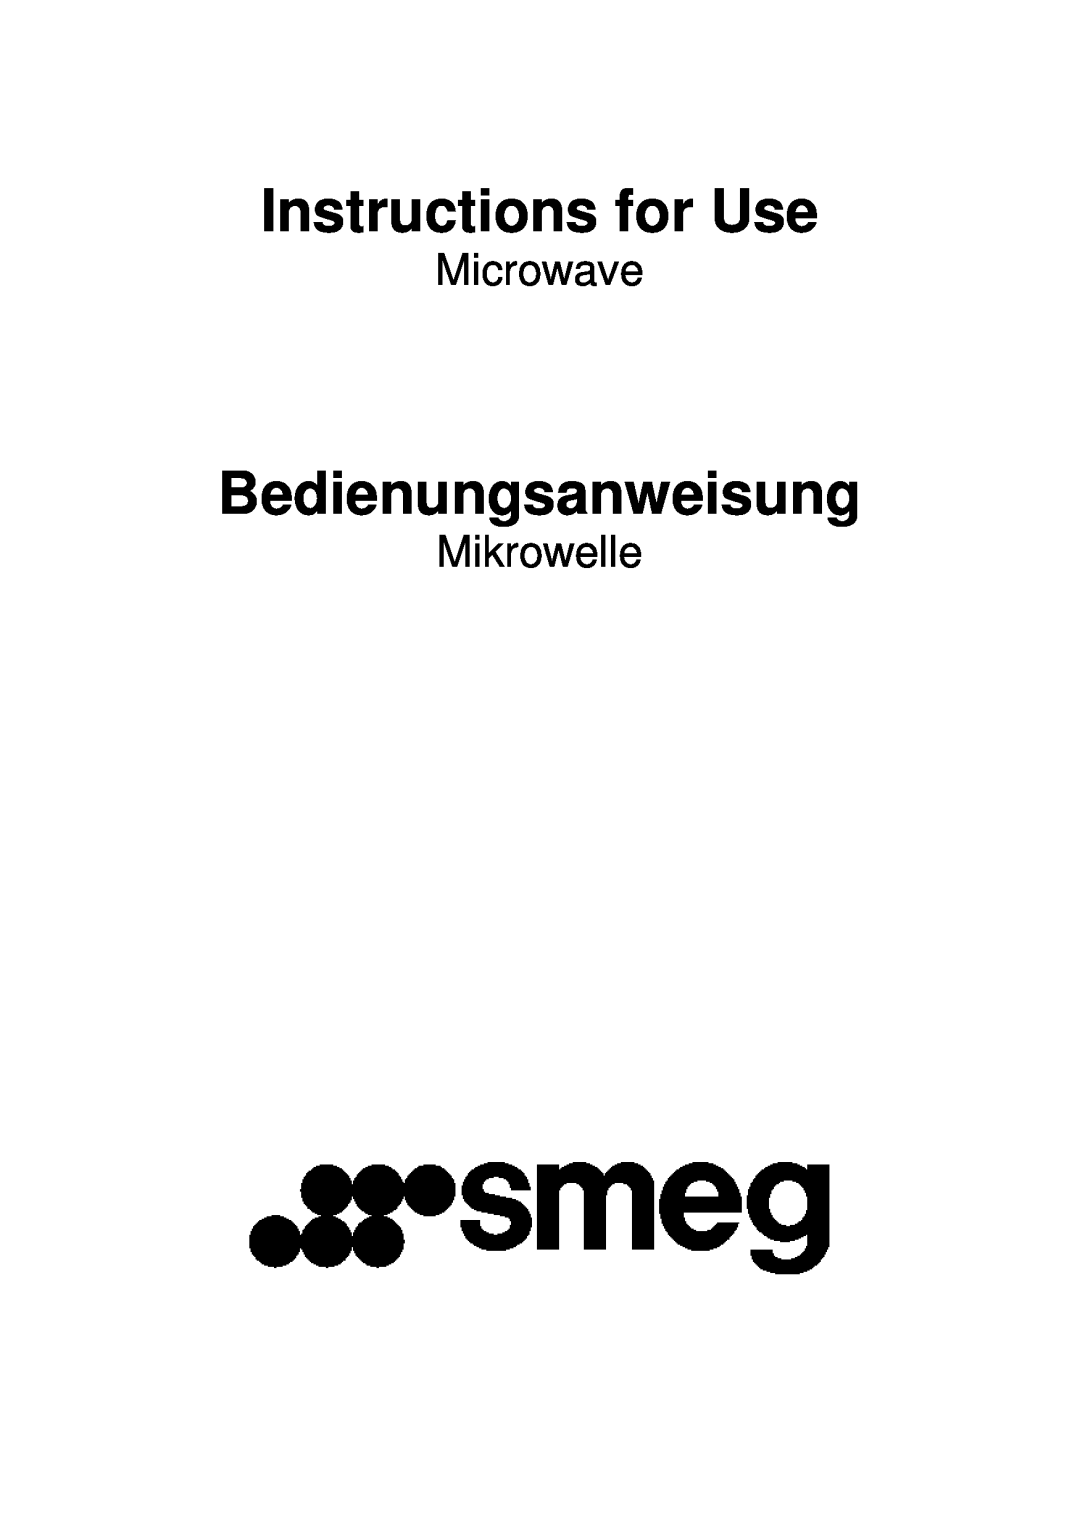 Smeg S45MCX1 manual Instructions for Use, Bedienungsanweisung, Microwave, Mikrowelle 